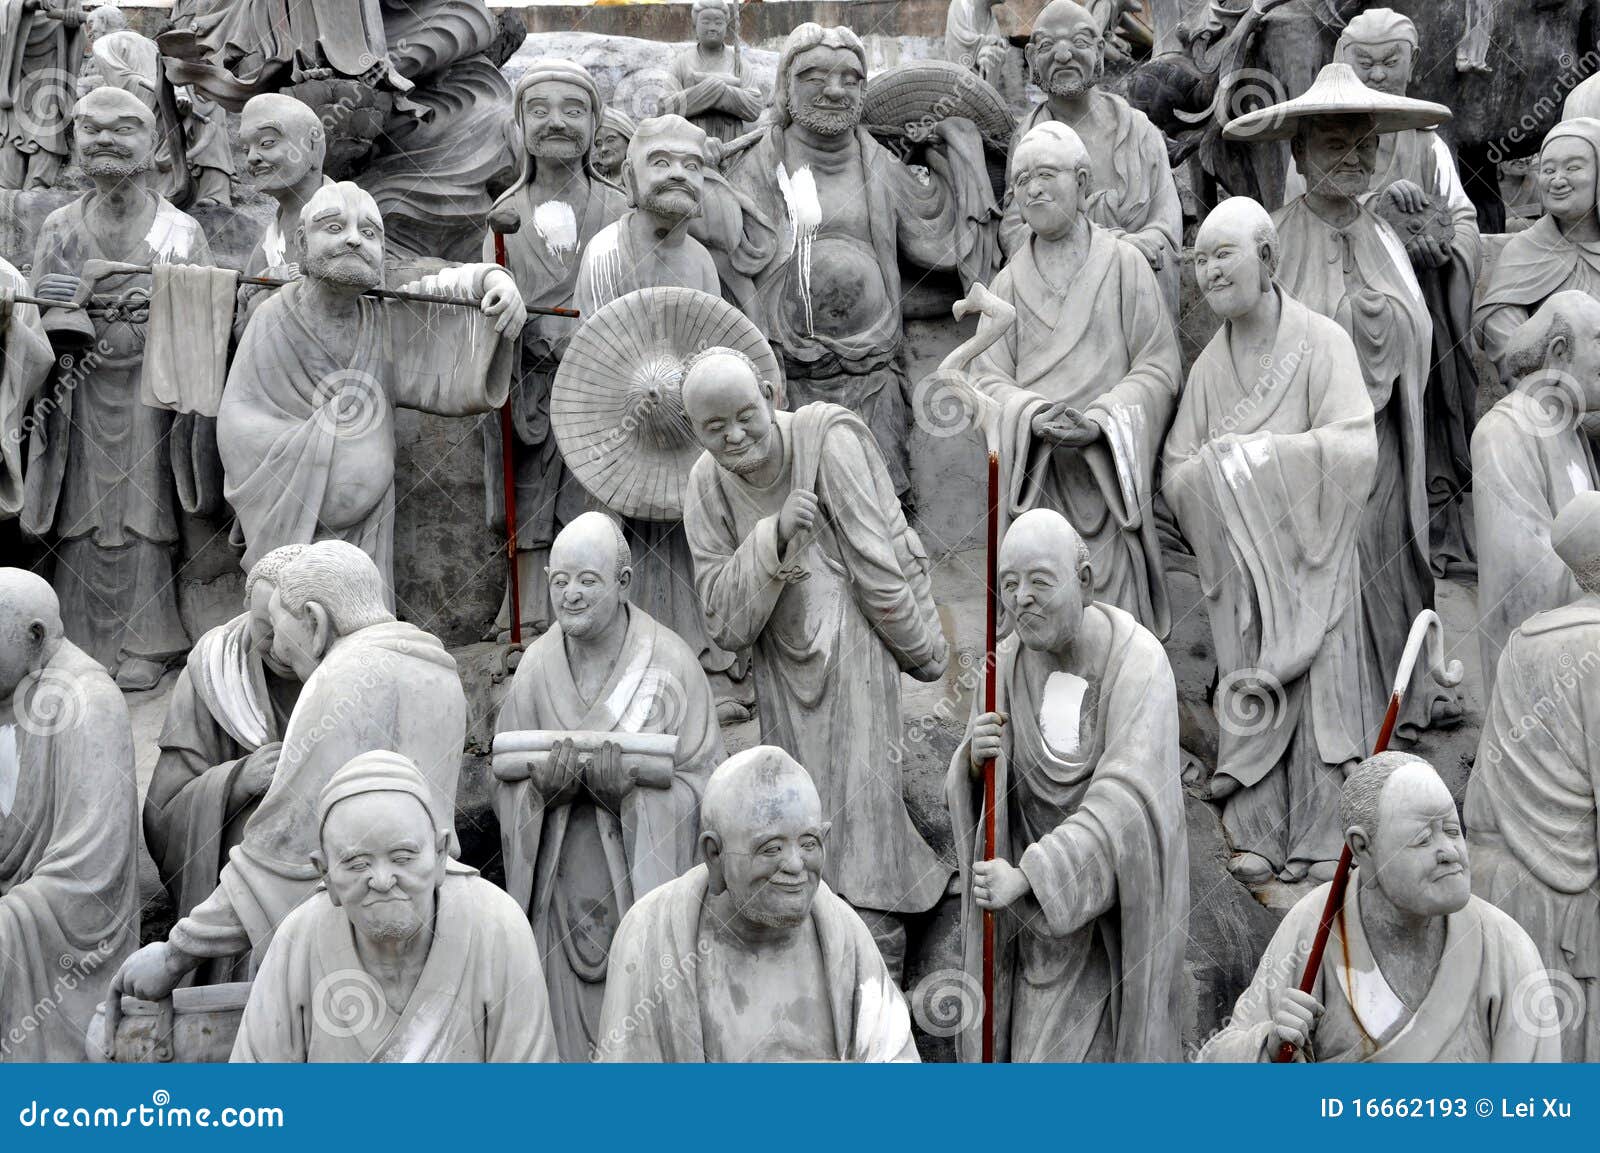 mianyang, china: tableaux sculptures at temple